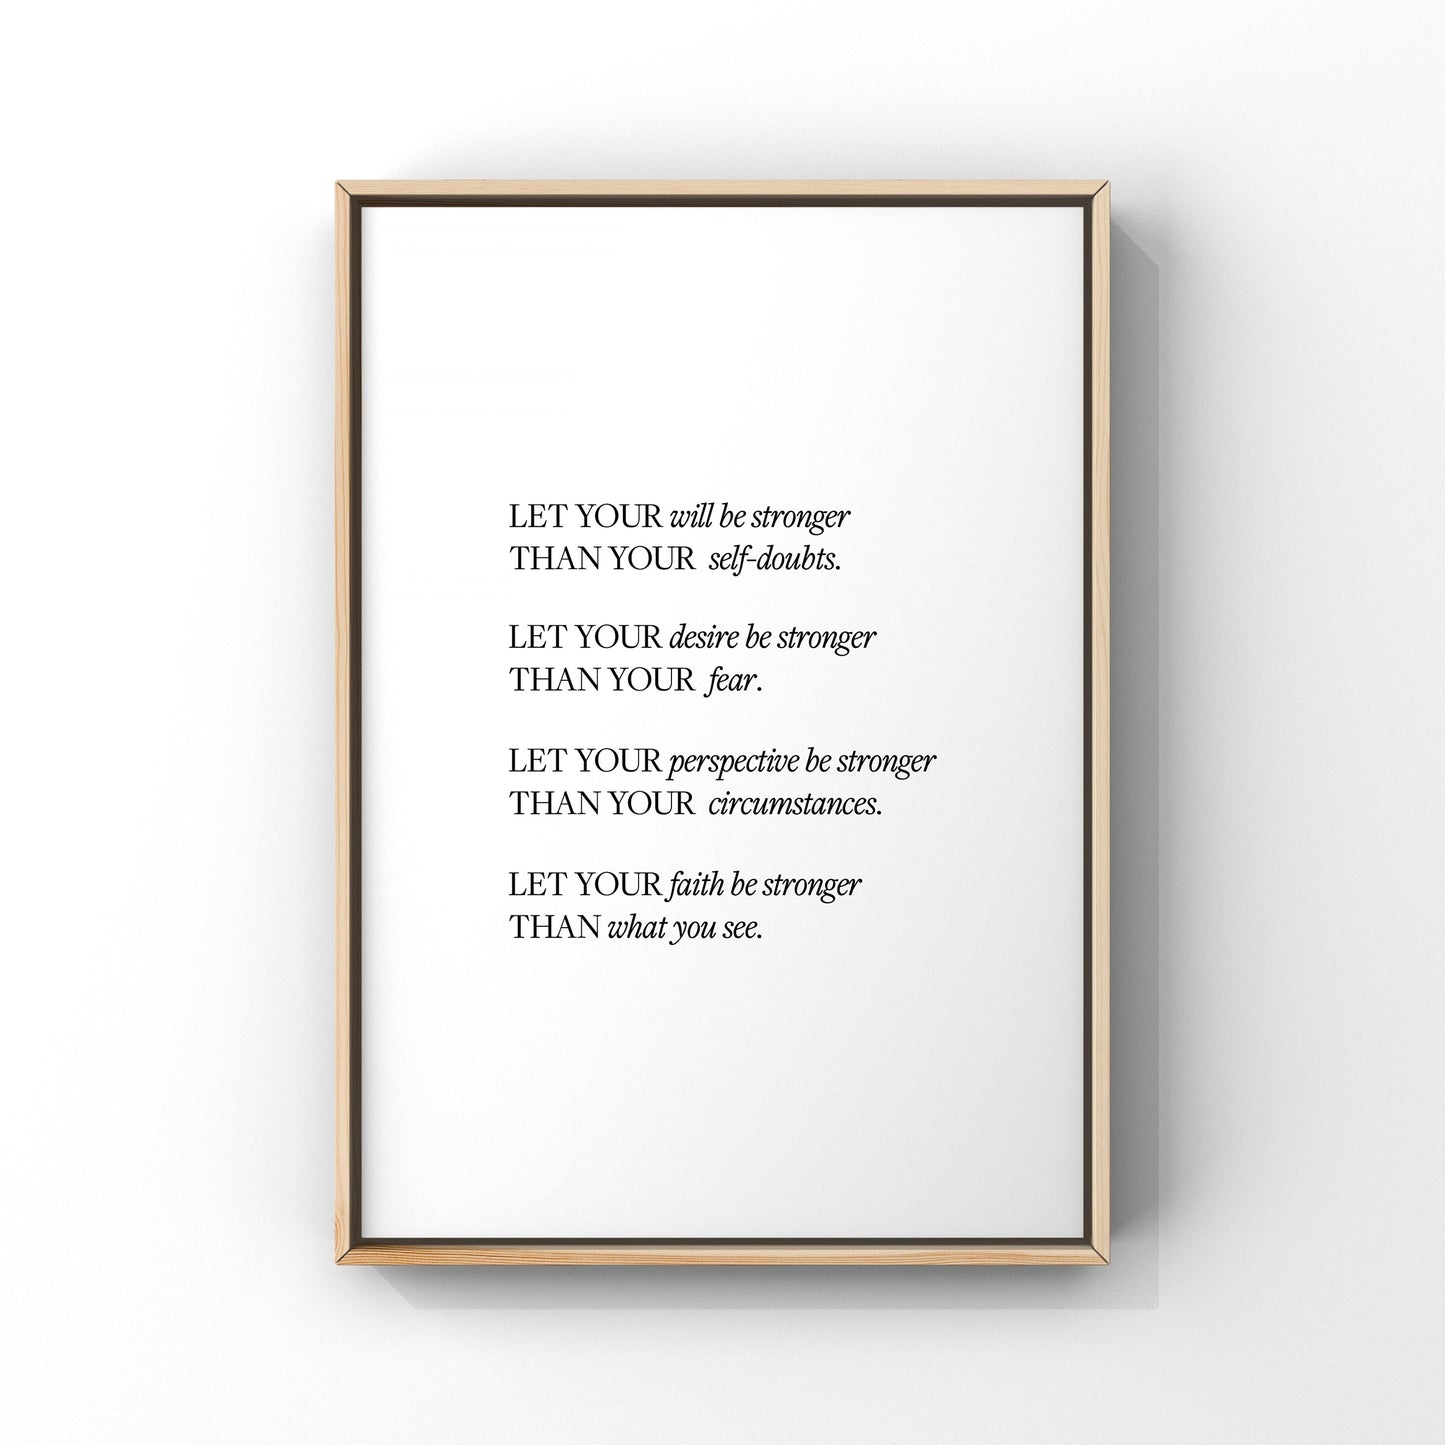 Let your will be stronger print,Inspirational wall art,Motivational quote print,Positive quote,Office wall art,Encouragement gift,Failure